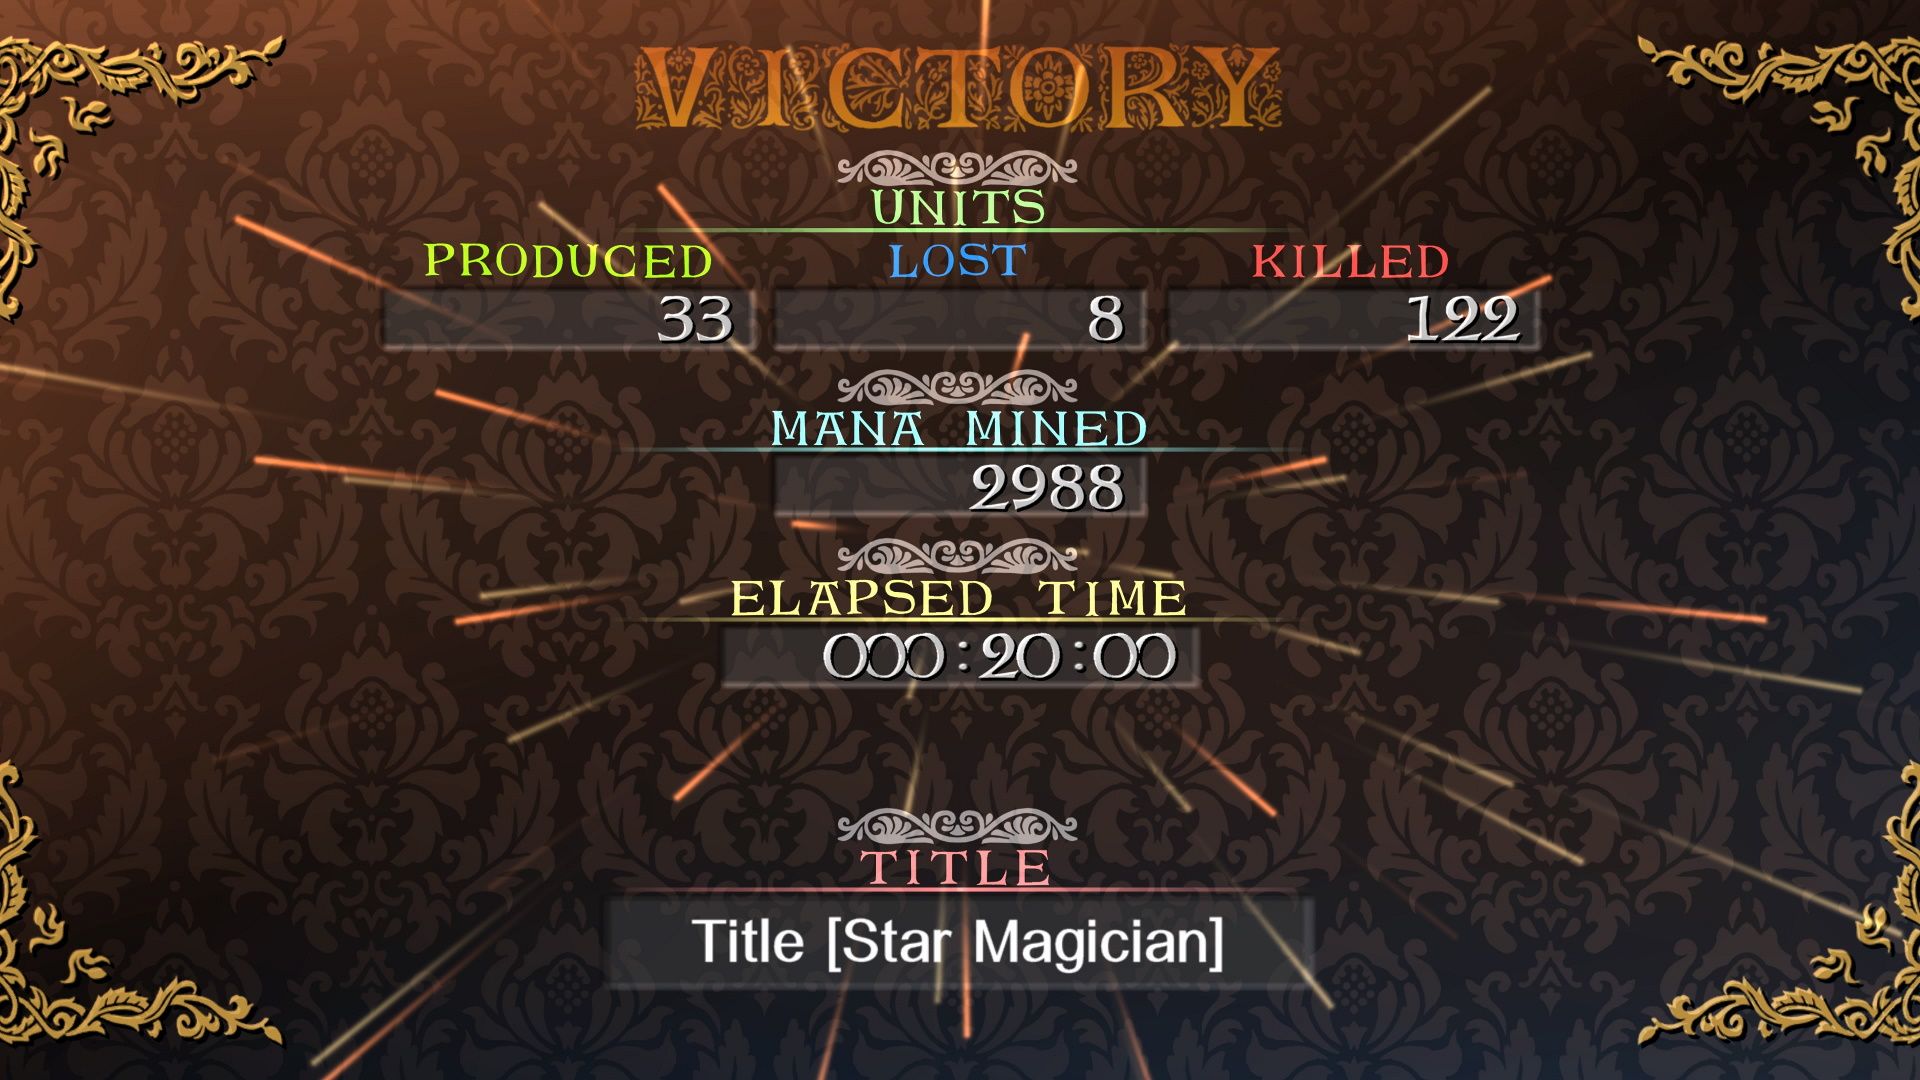 GrimGrimoire OnceMore, First Cycle, Showing the victory screen